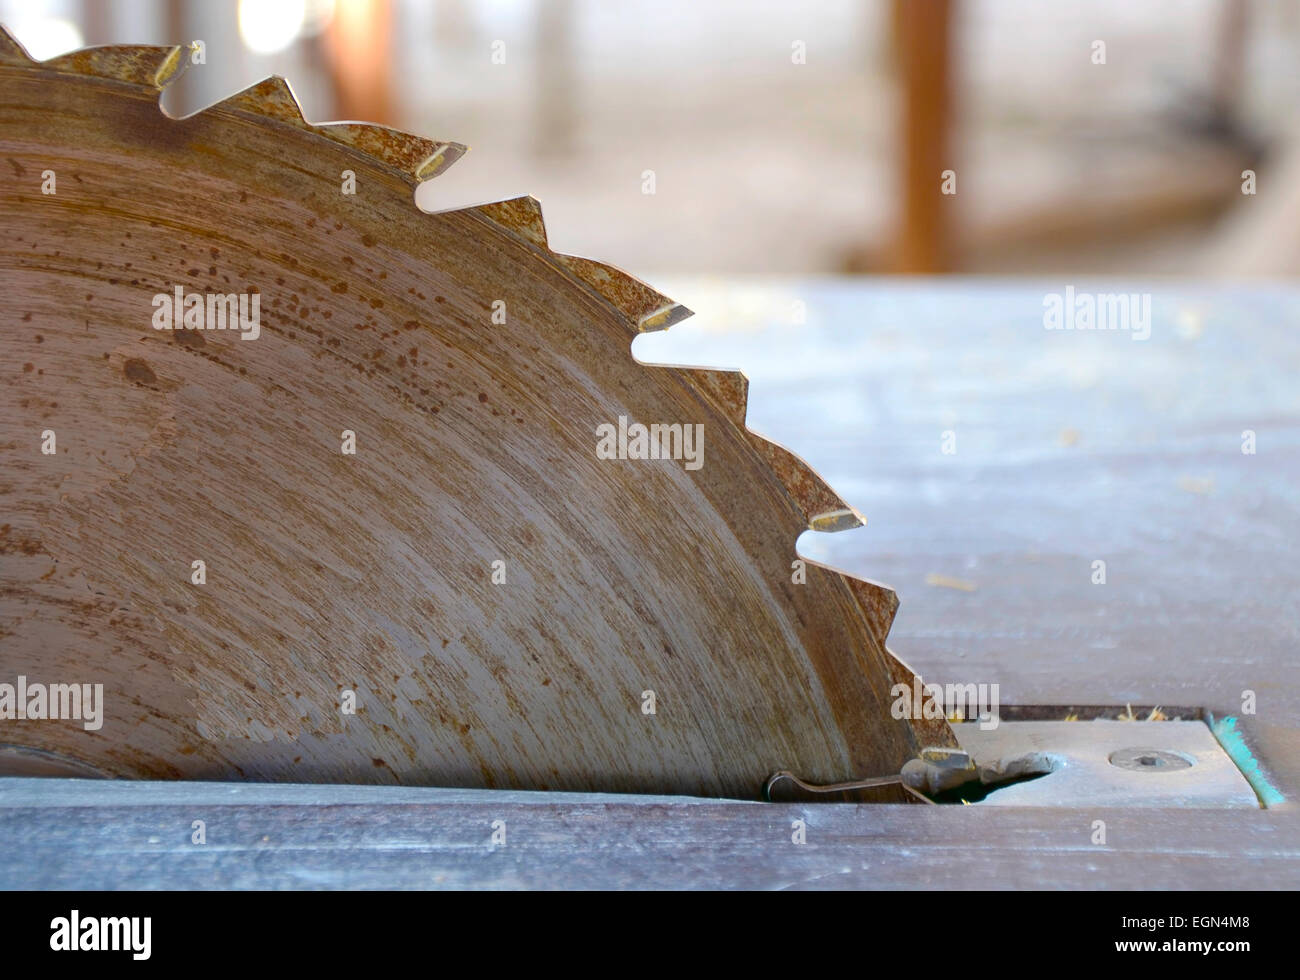 close up for circular saw in carpenter's shop. Focus is on the tools and tiles. Stock Photo